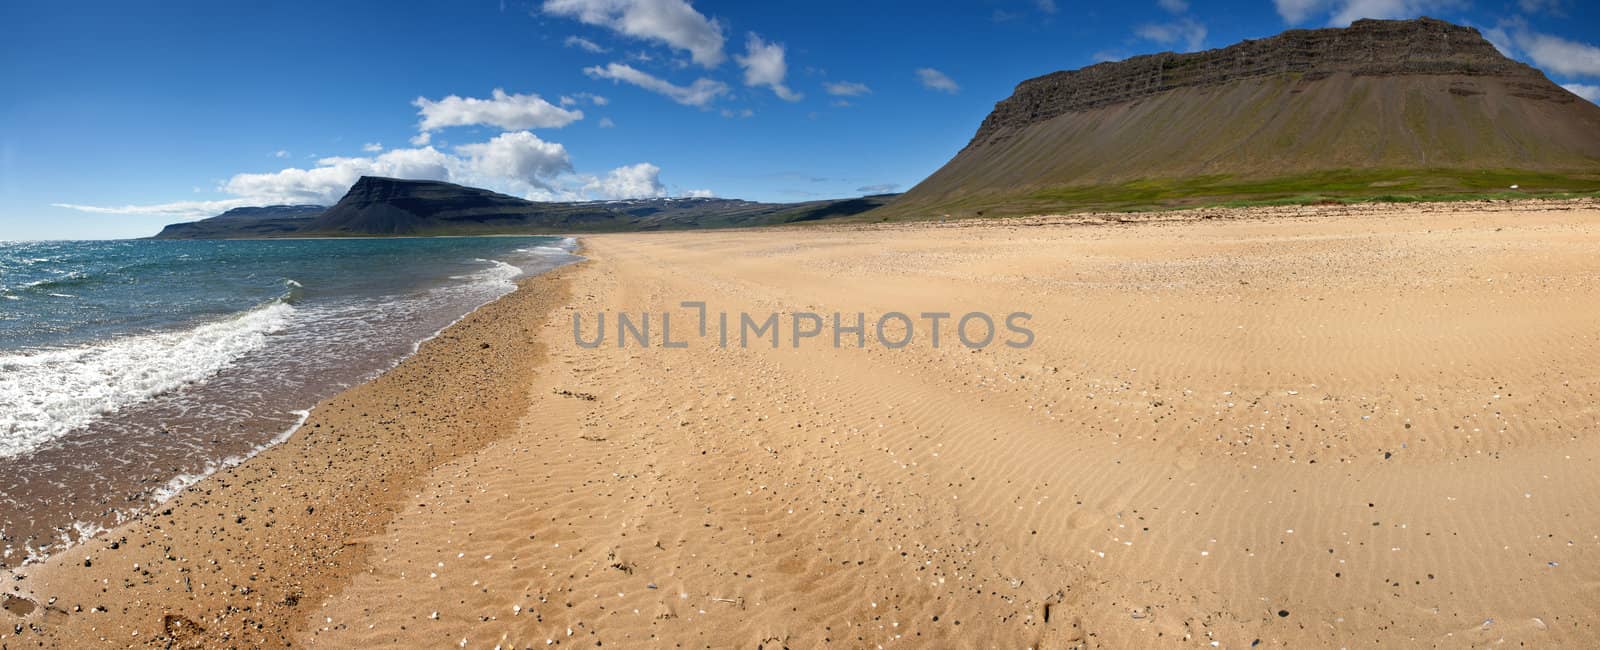 Beach under the mighty fjords rising from the sea in the Westfjords Peninsula, northwestern Iceland